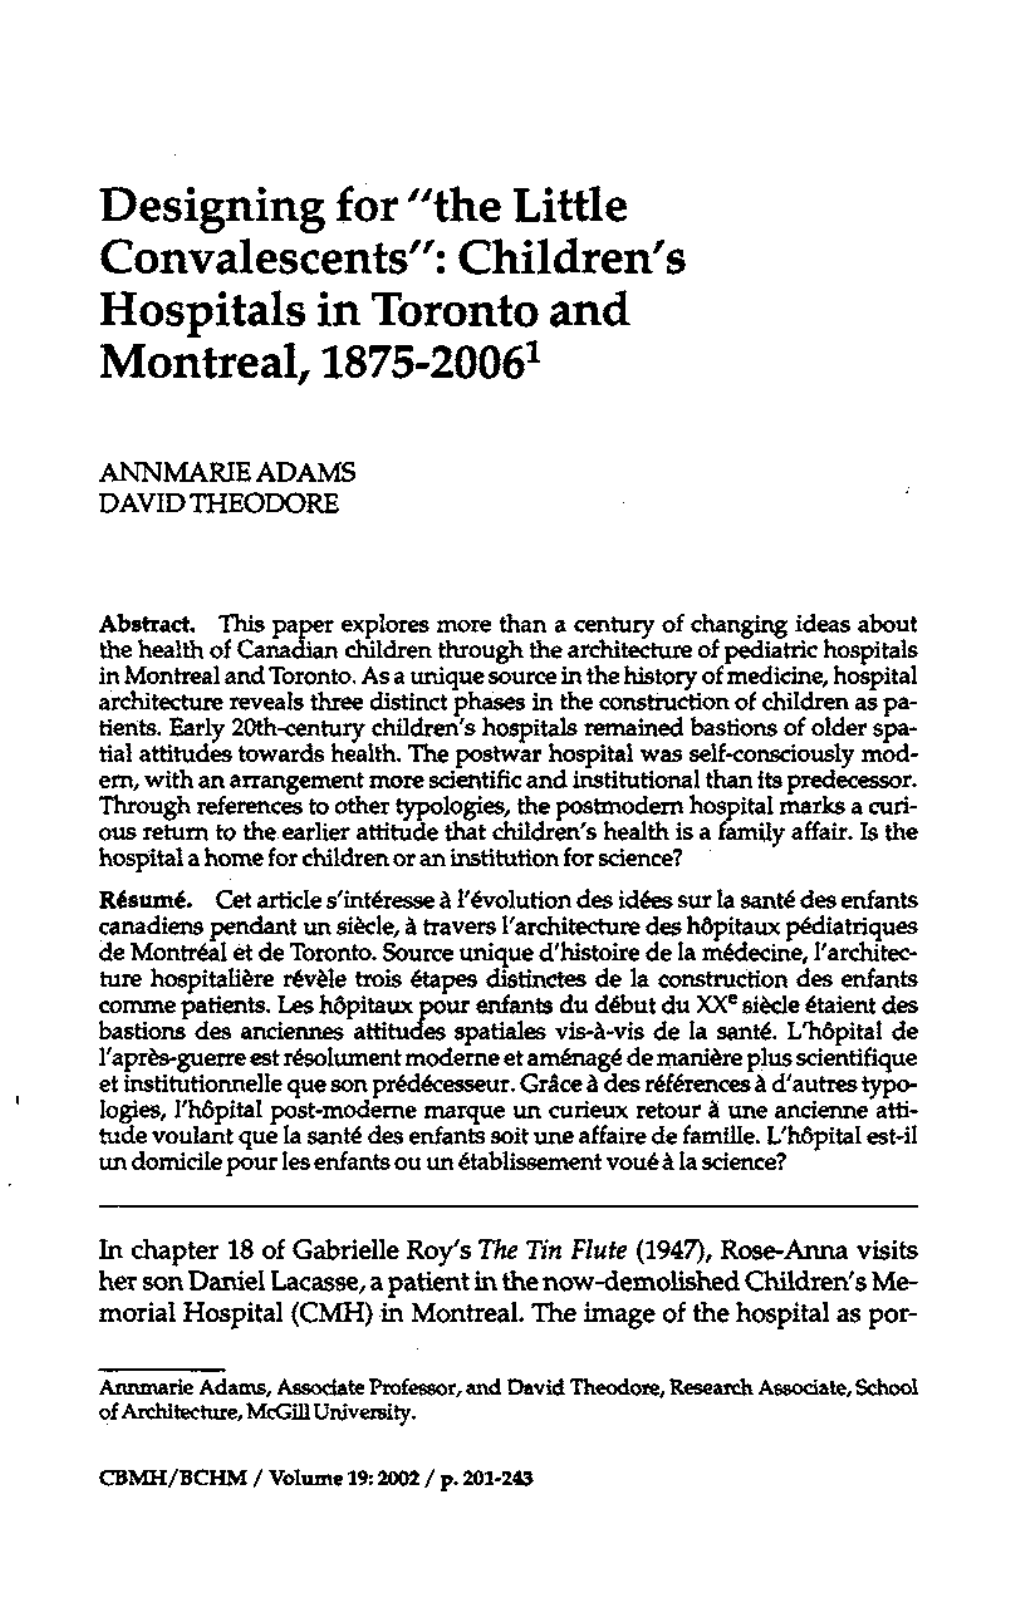 Designing for "The Little Convalescents": Children's Hospitals in Toronto and Montreal, 1875-20061